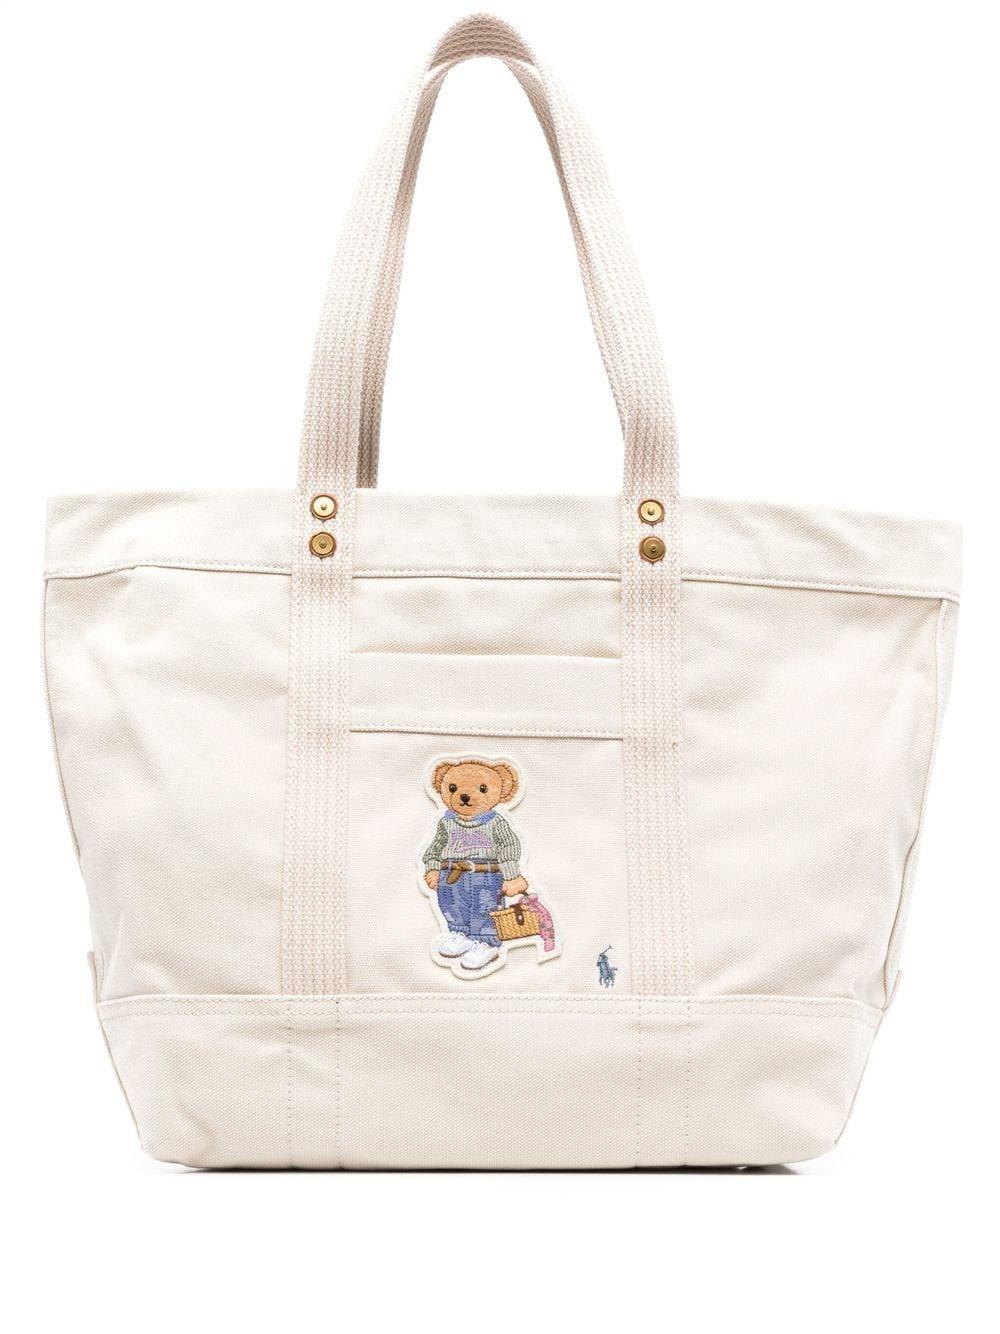 Polo Ralph Lauren Bear-print Canvas Tote Bag in Natural | Lyst